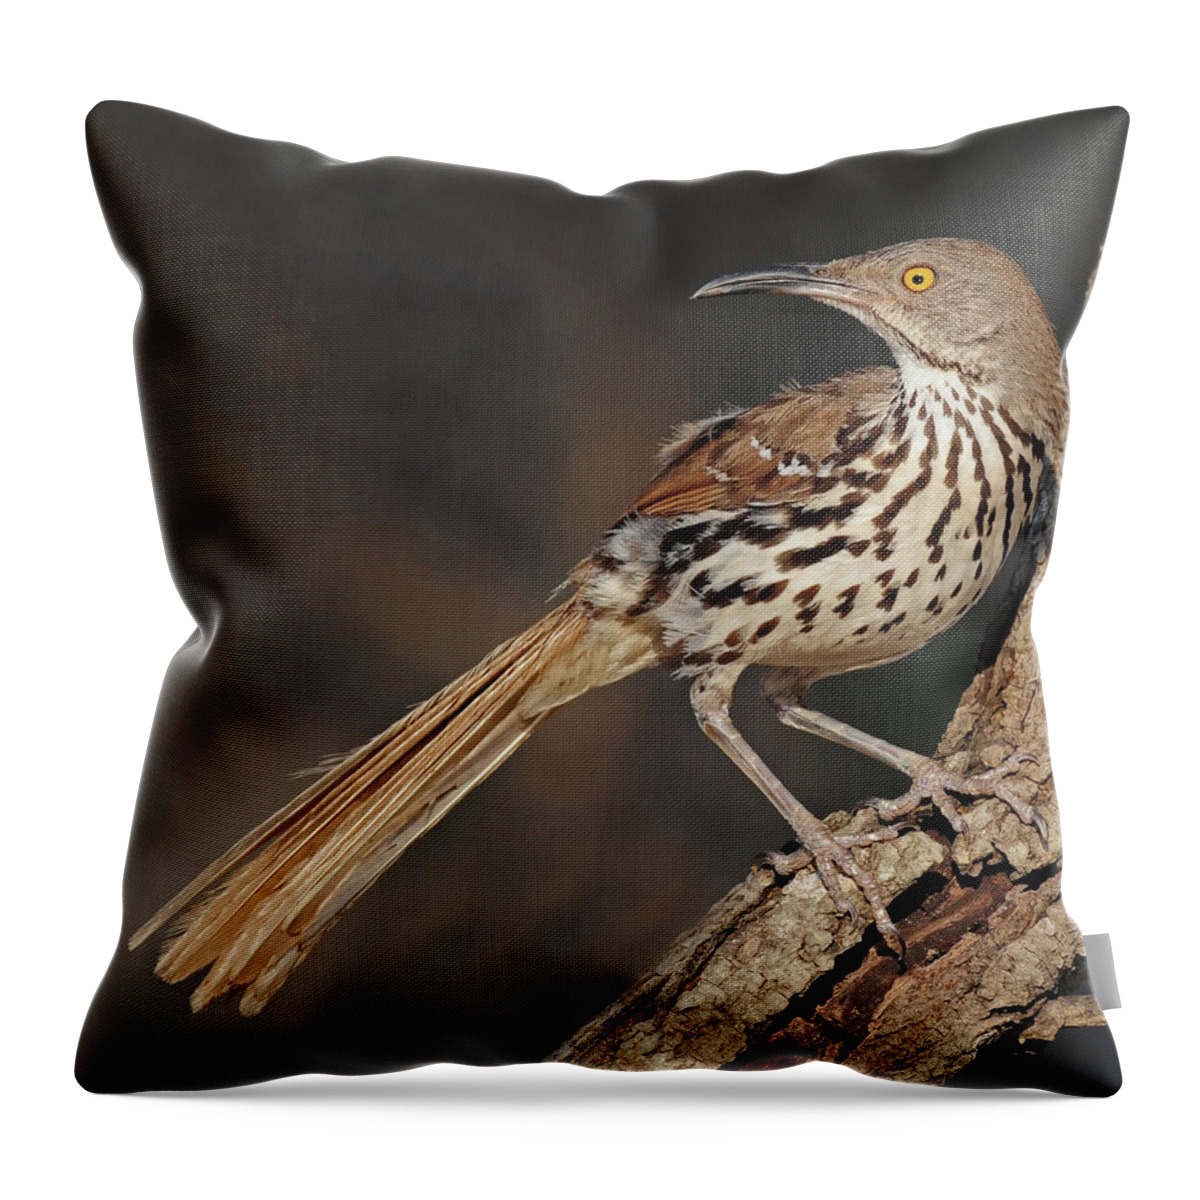 Curvedbill Thrasher Throw Pillow featuring the photograph Curvedbill Thrasher by Dave Mills